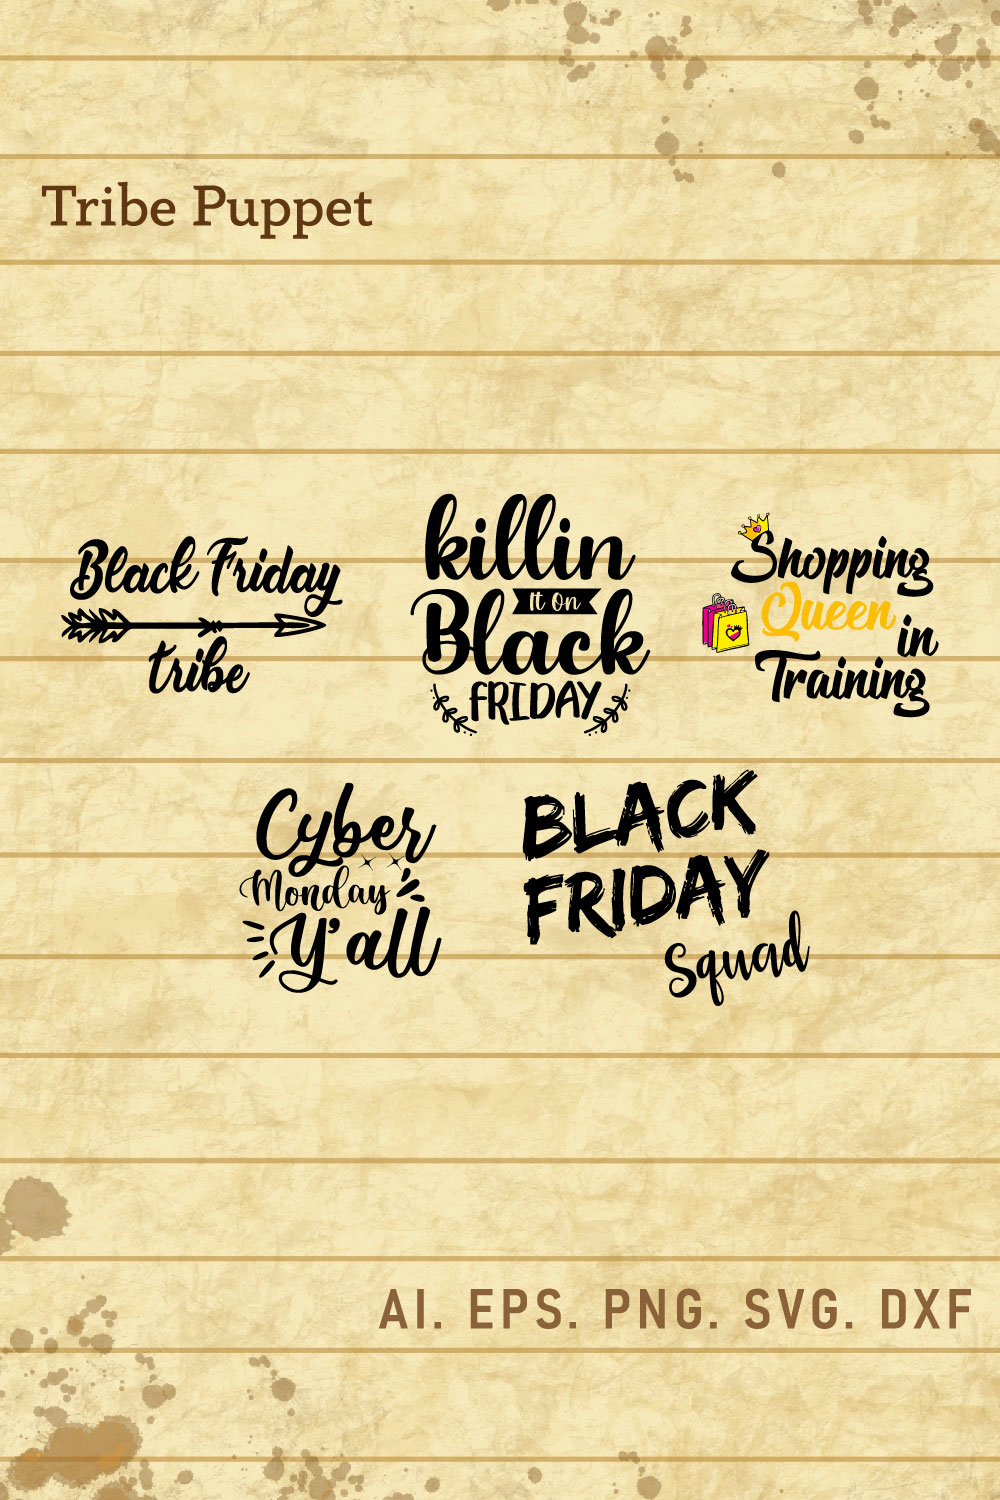 Black Friday pinterest preview image.